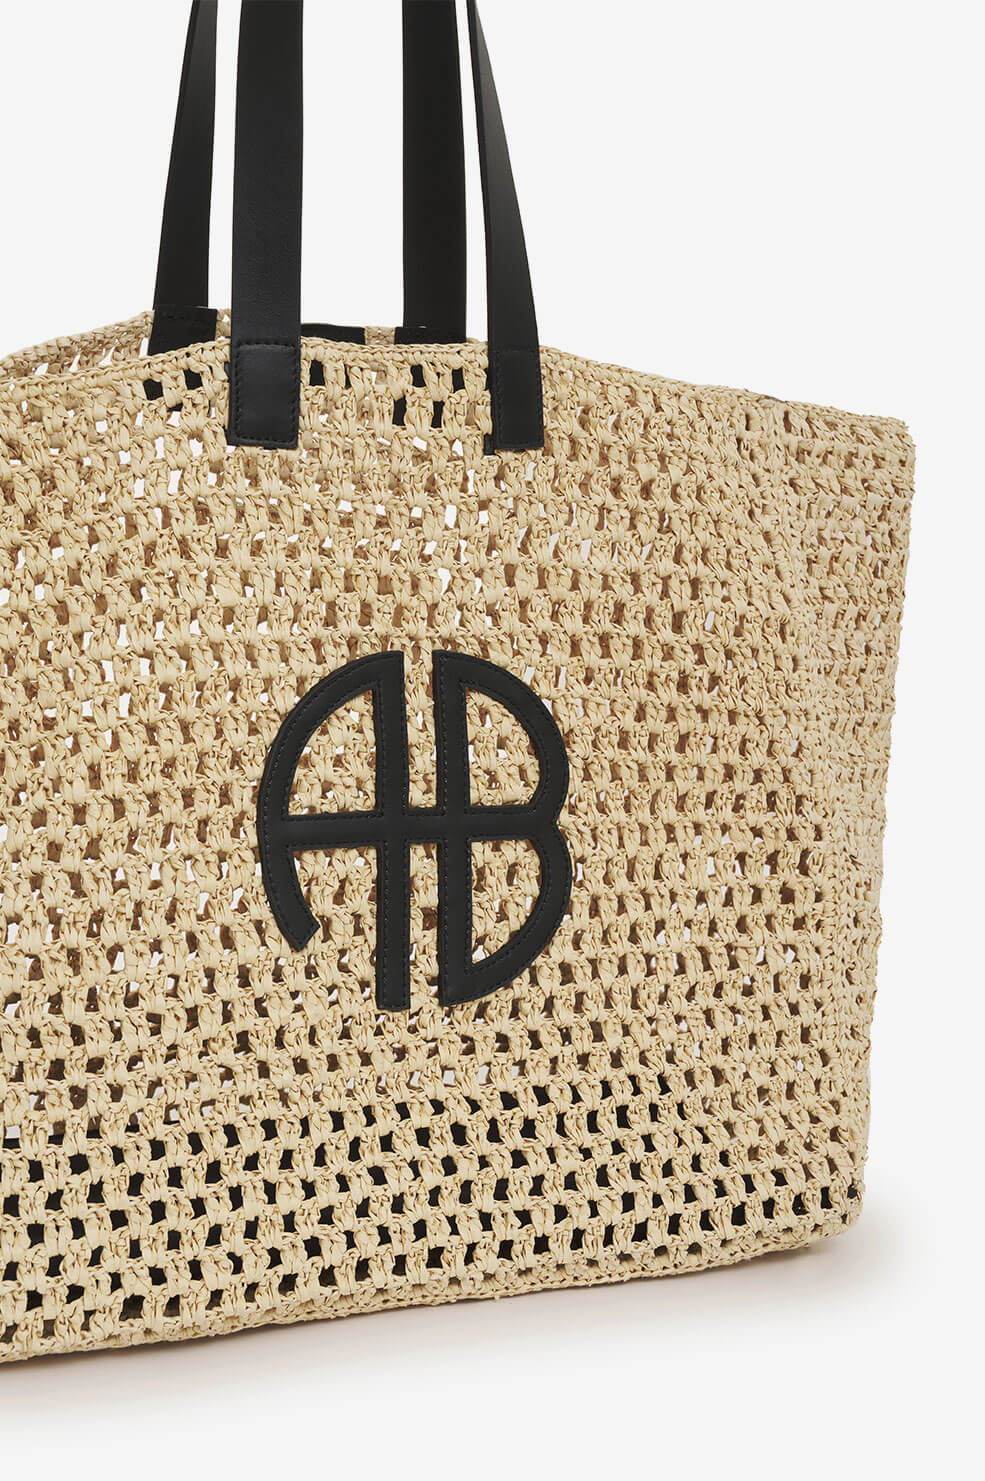 Anine Bing - Large Rio Tote in Natural Sand